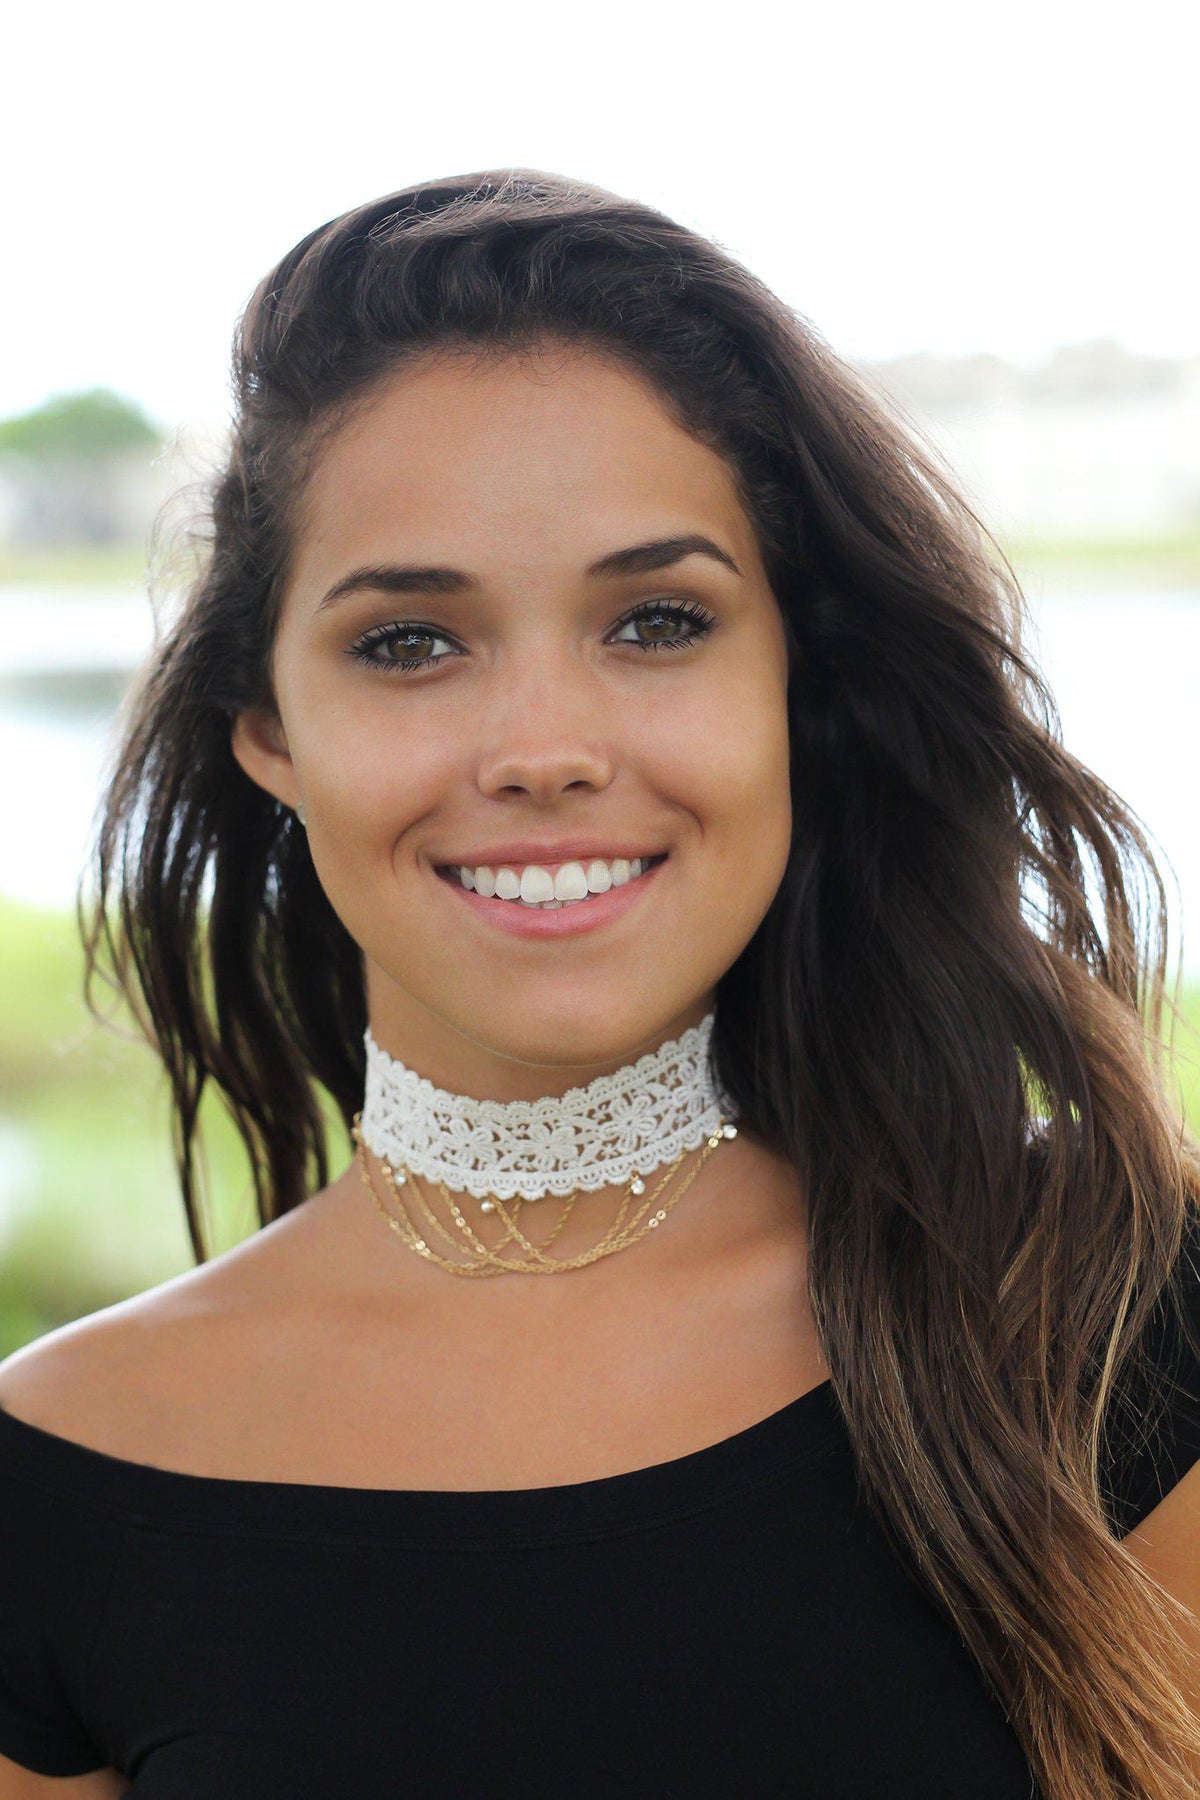 White Lace Choker with Gold Chain – Saved by the Dress